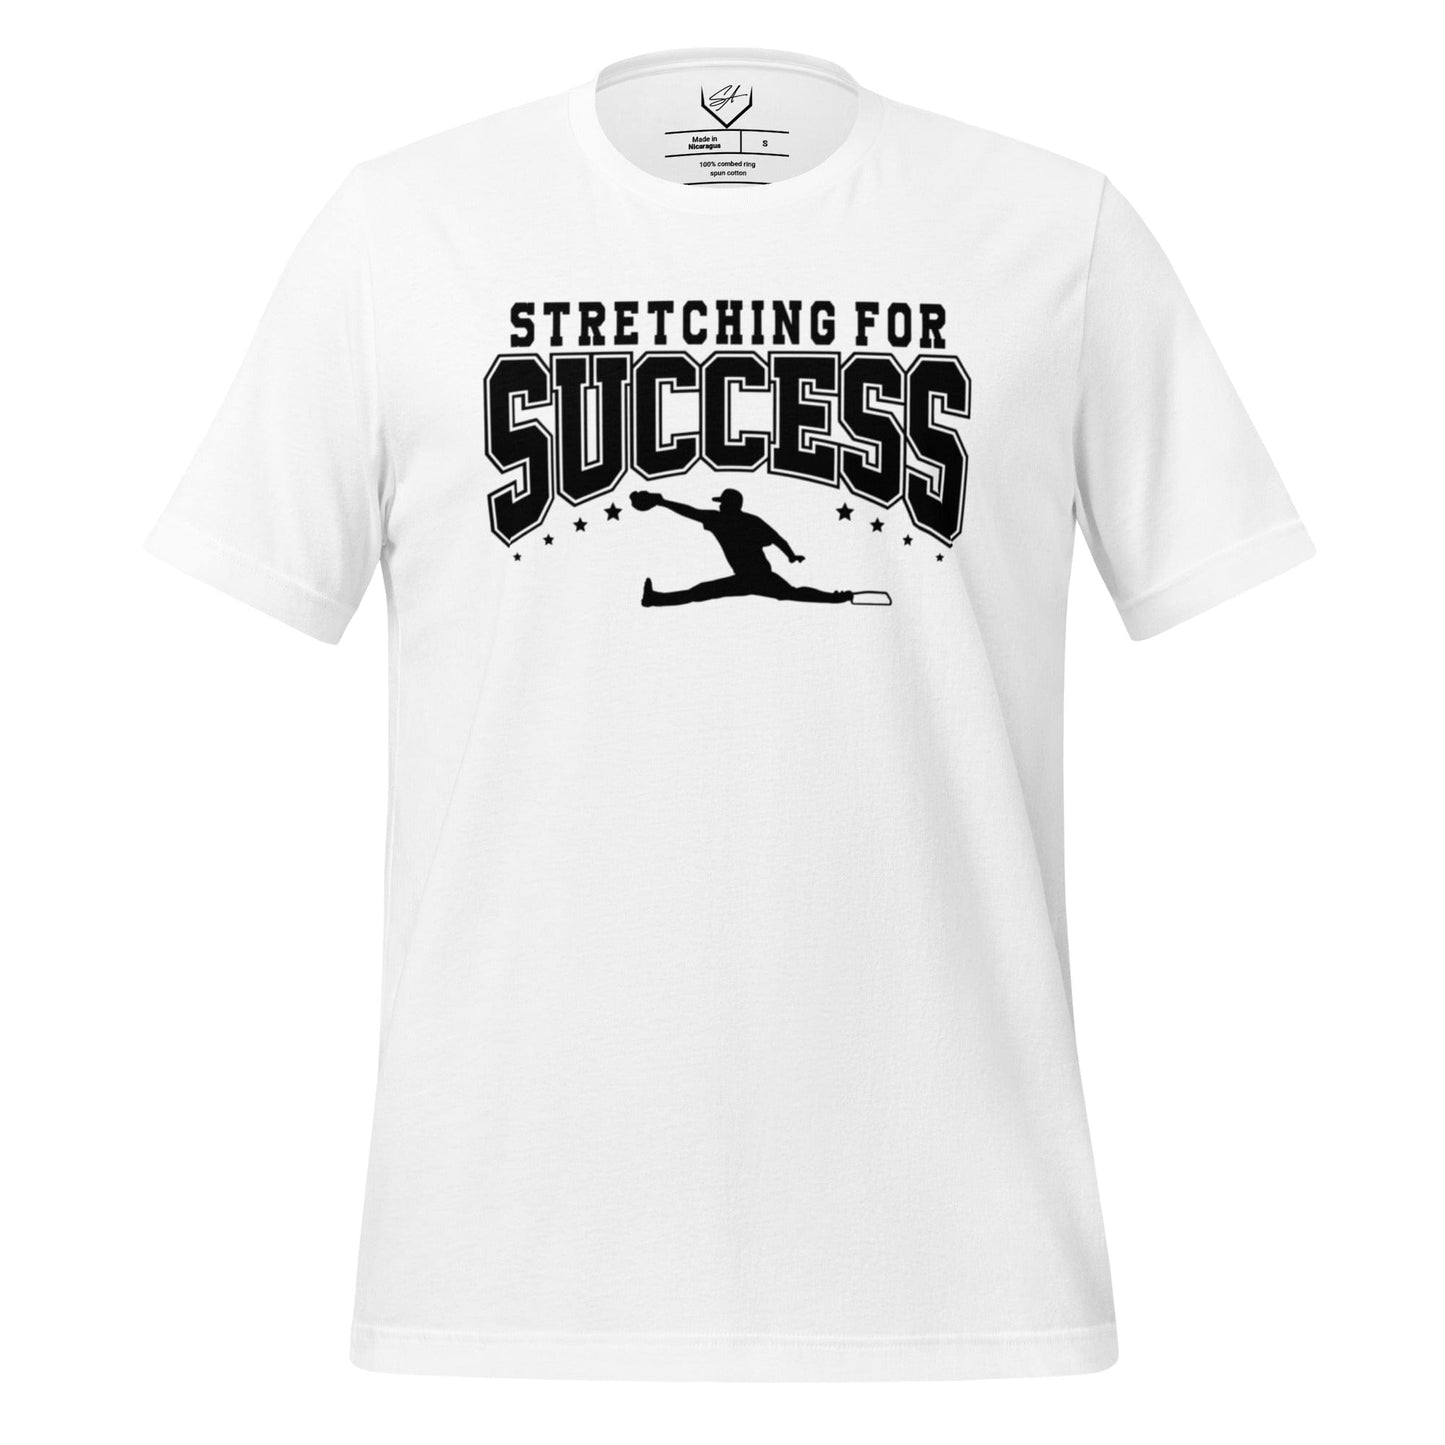 Stretching For Success - Adult Tee